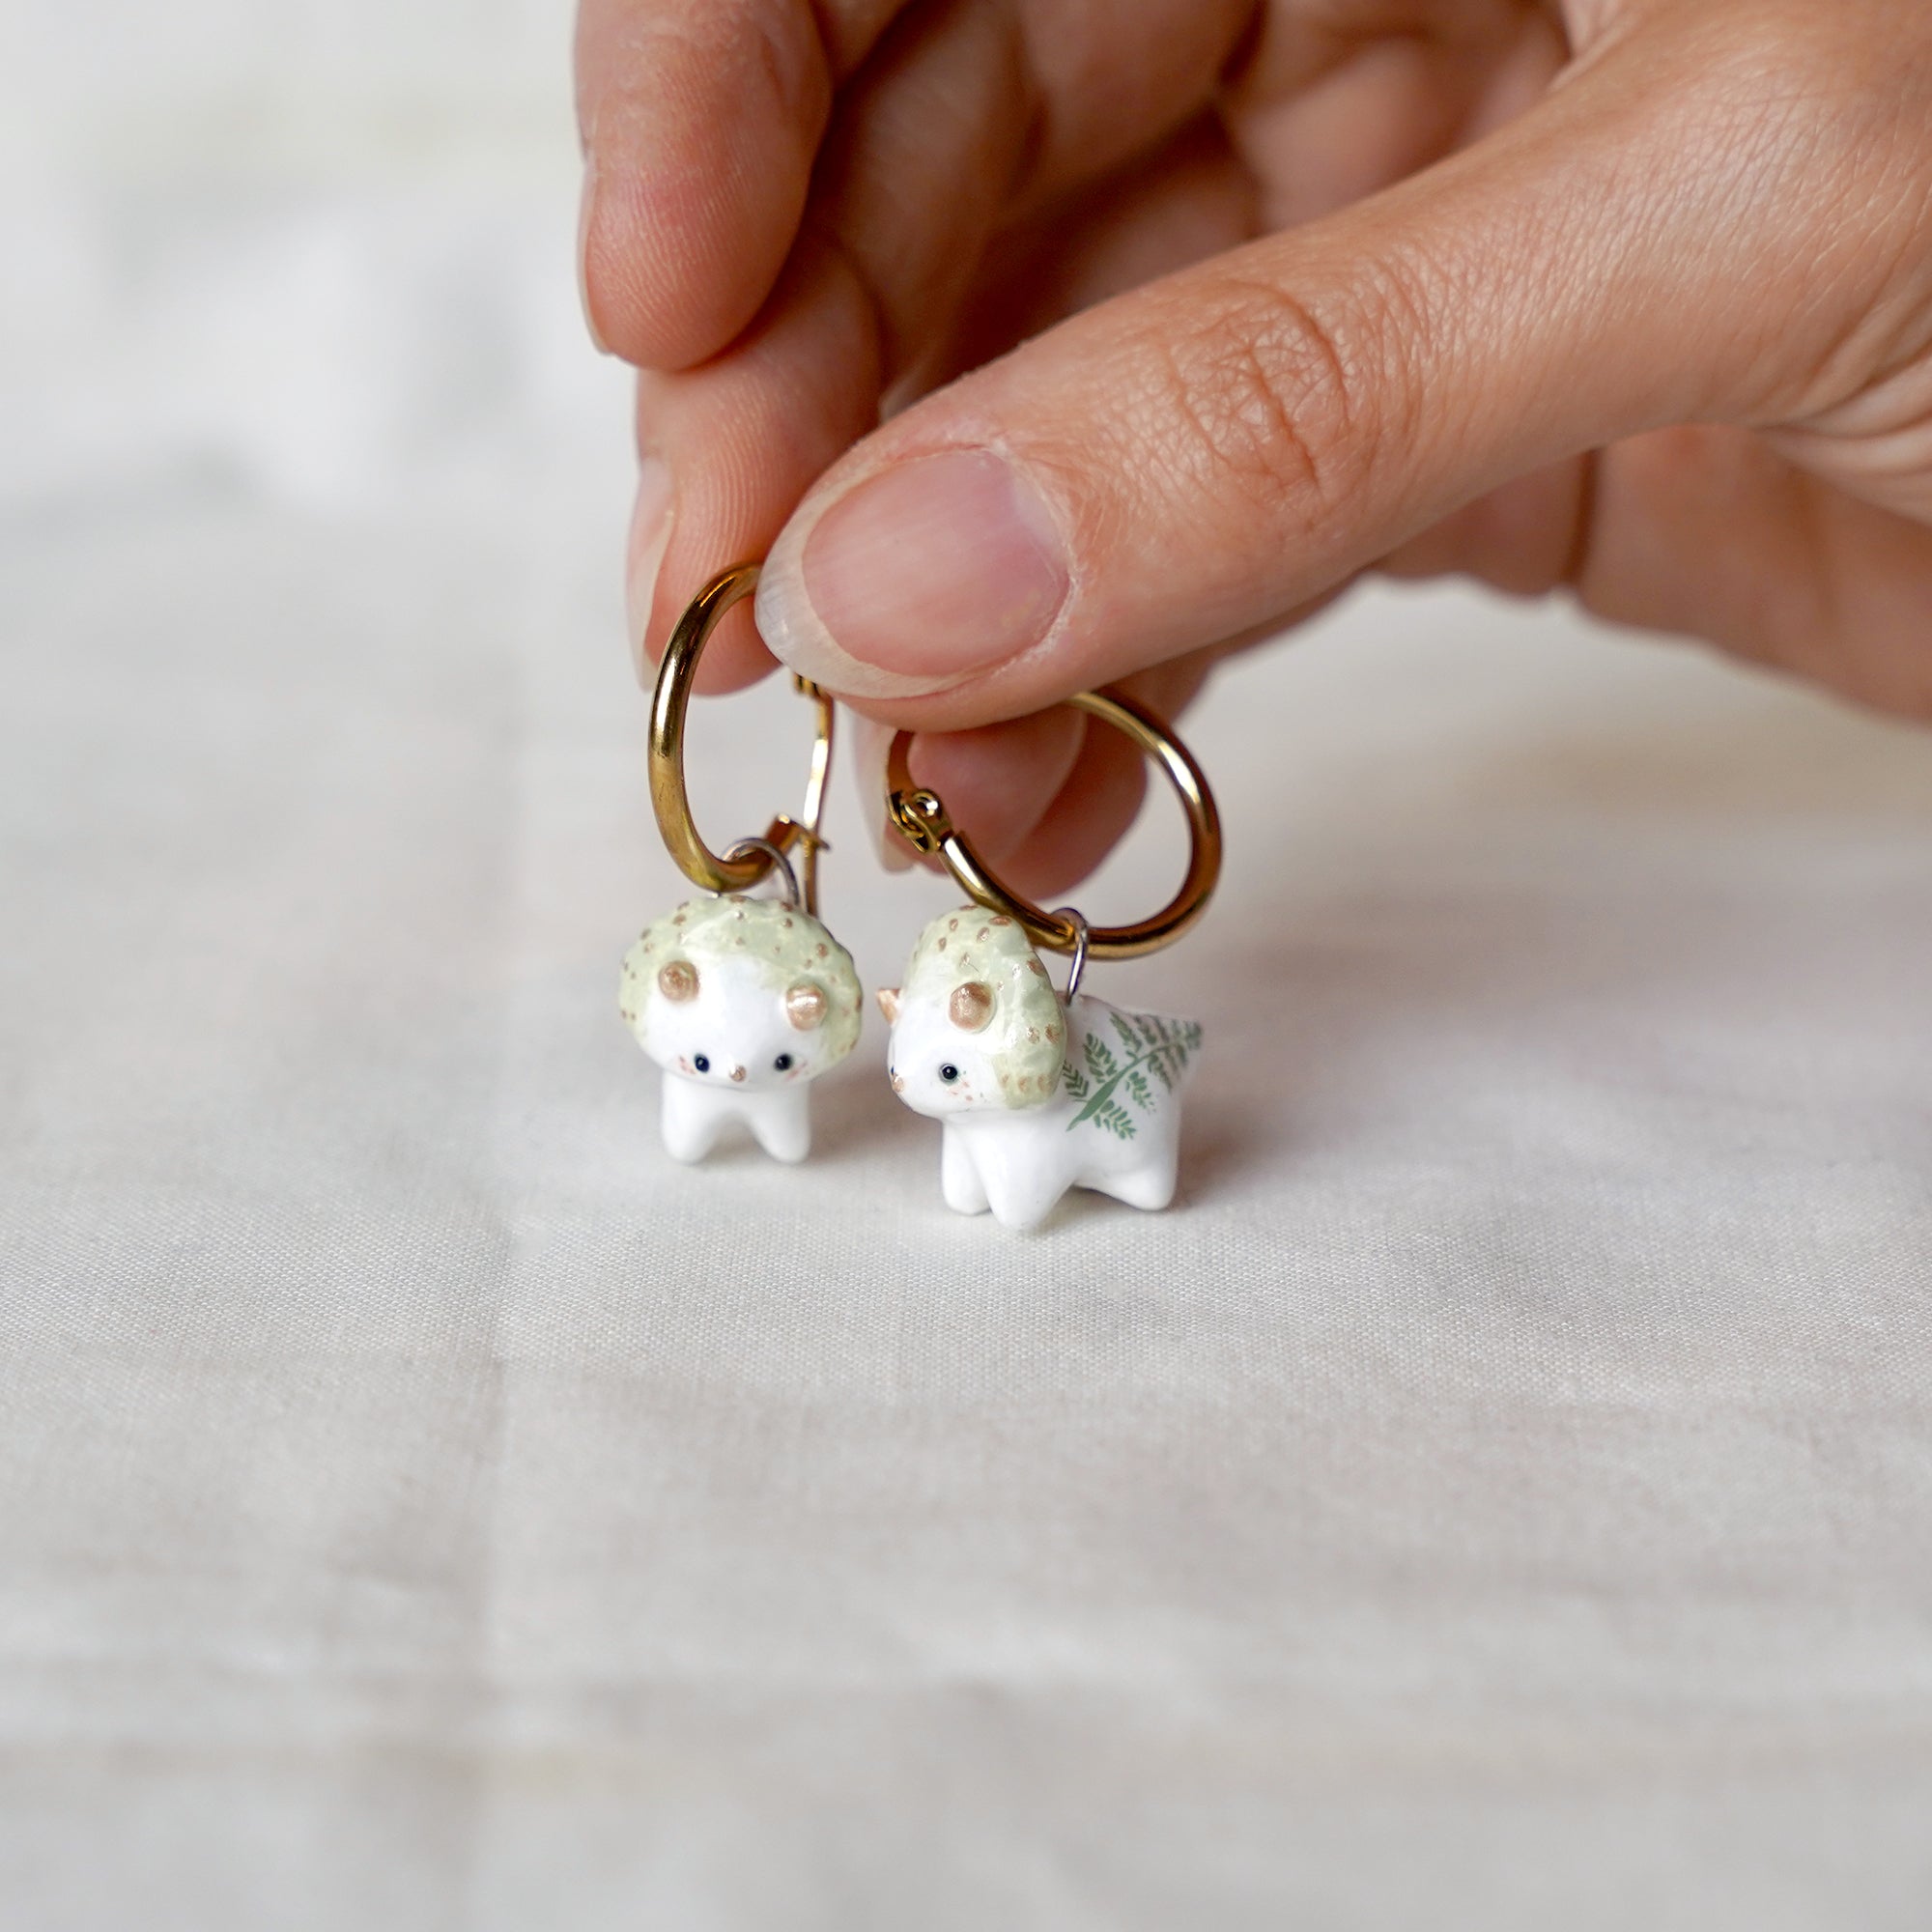 Triceratops with fern earrings